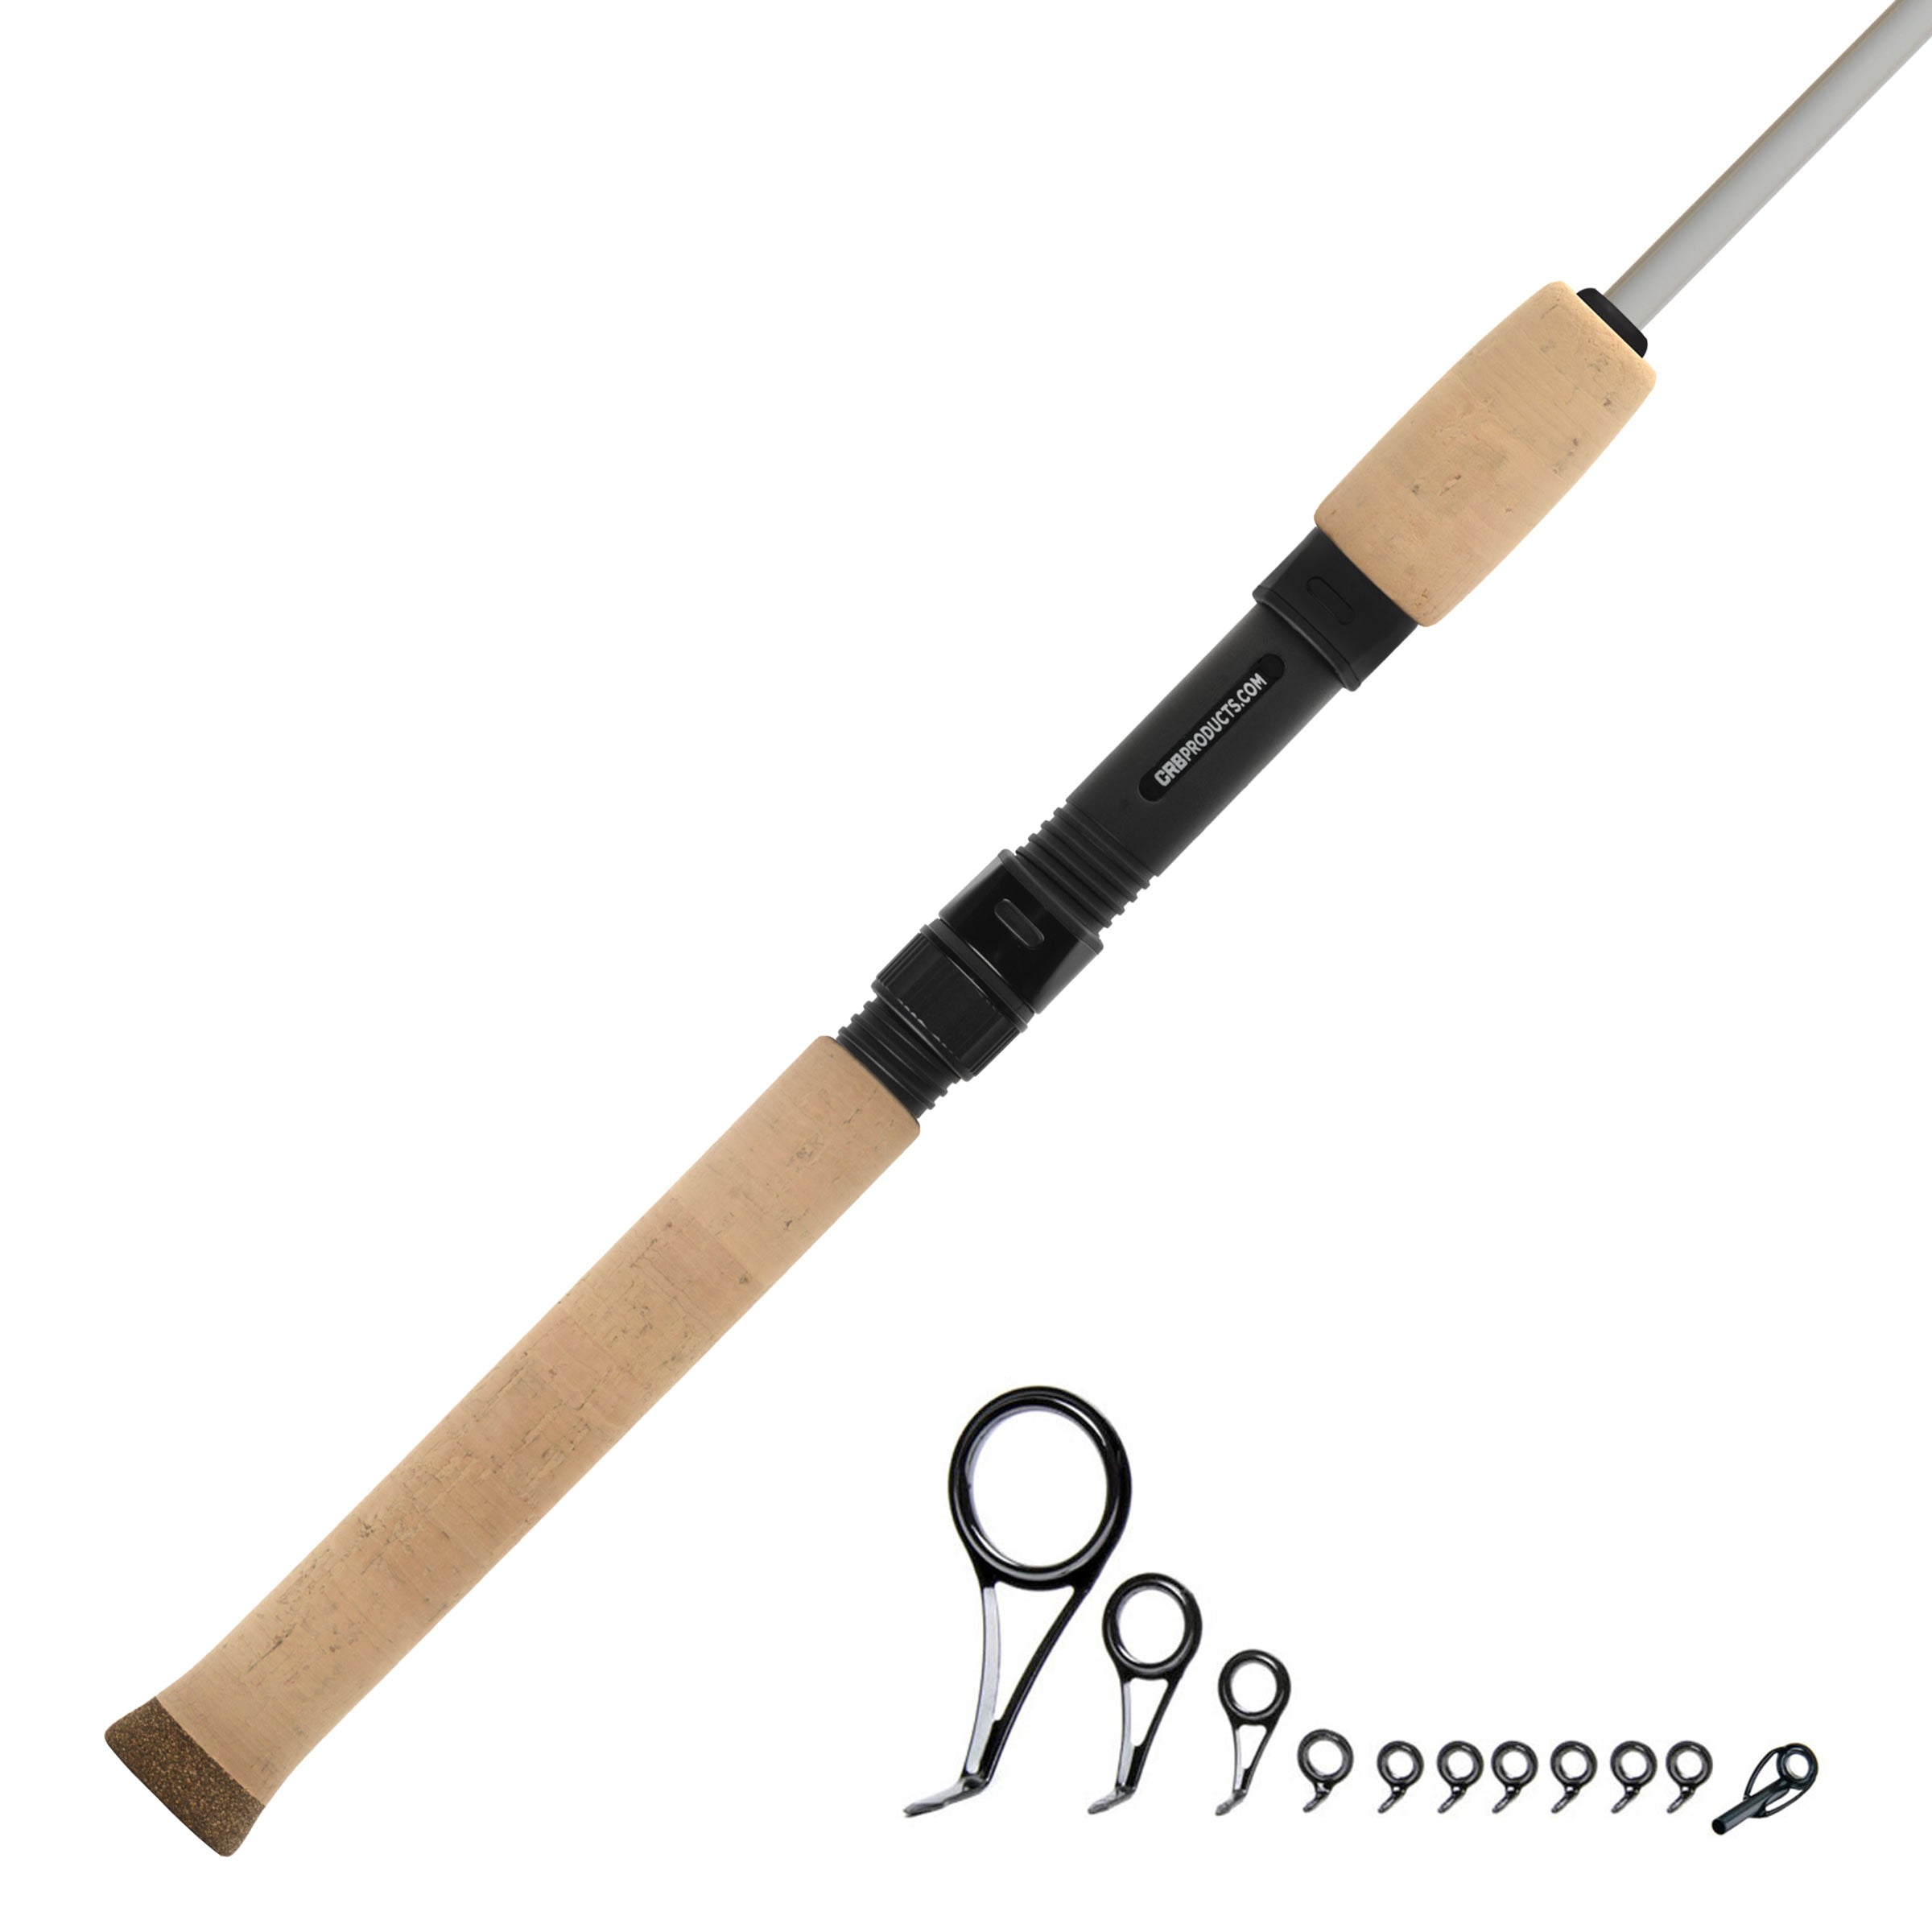 CRB 6'6 Ultralight 2-Piece Color Spinning Rod Kit